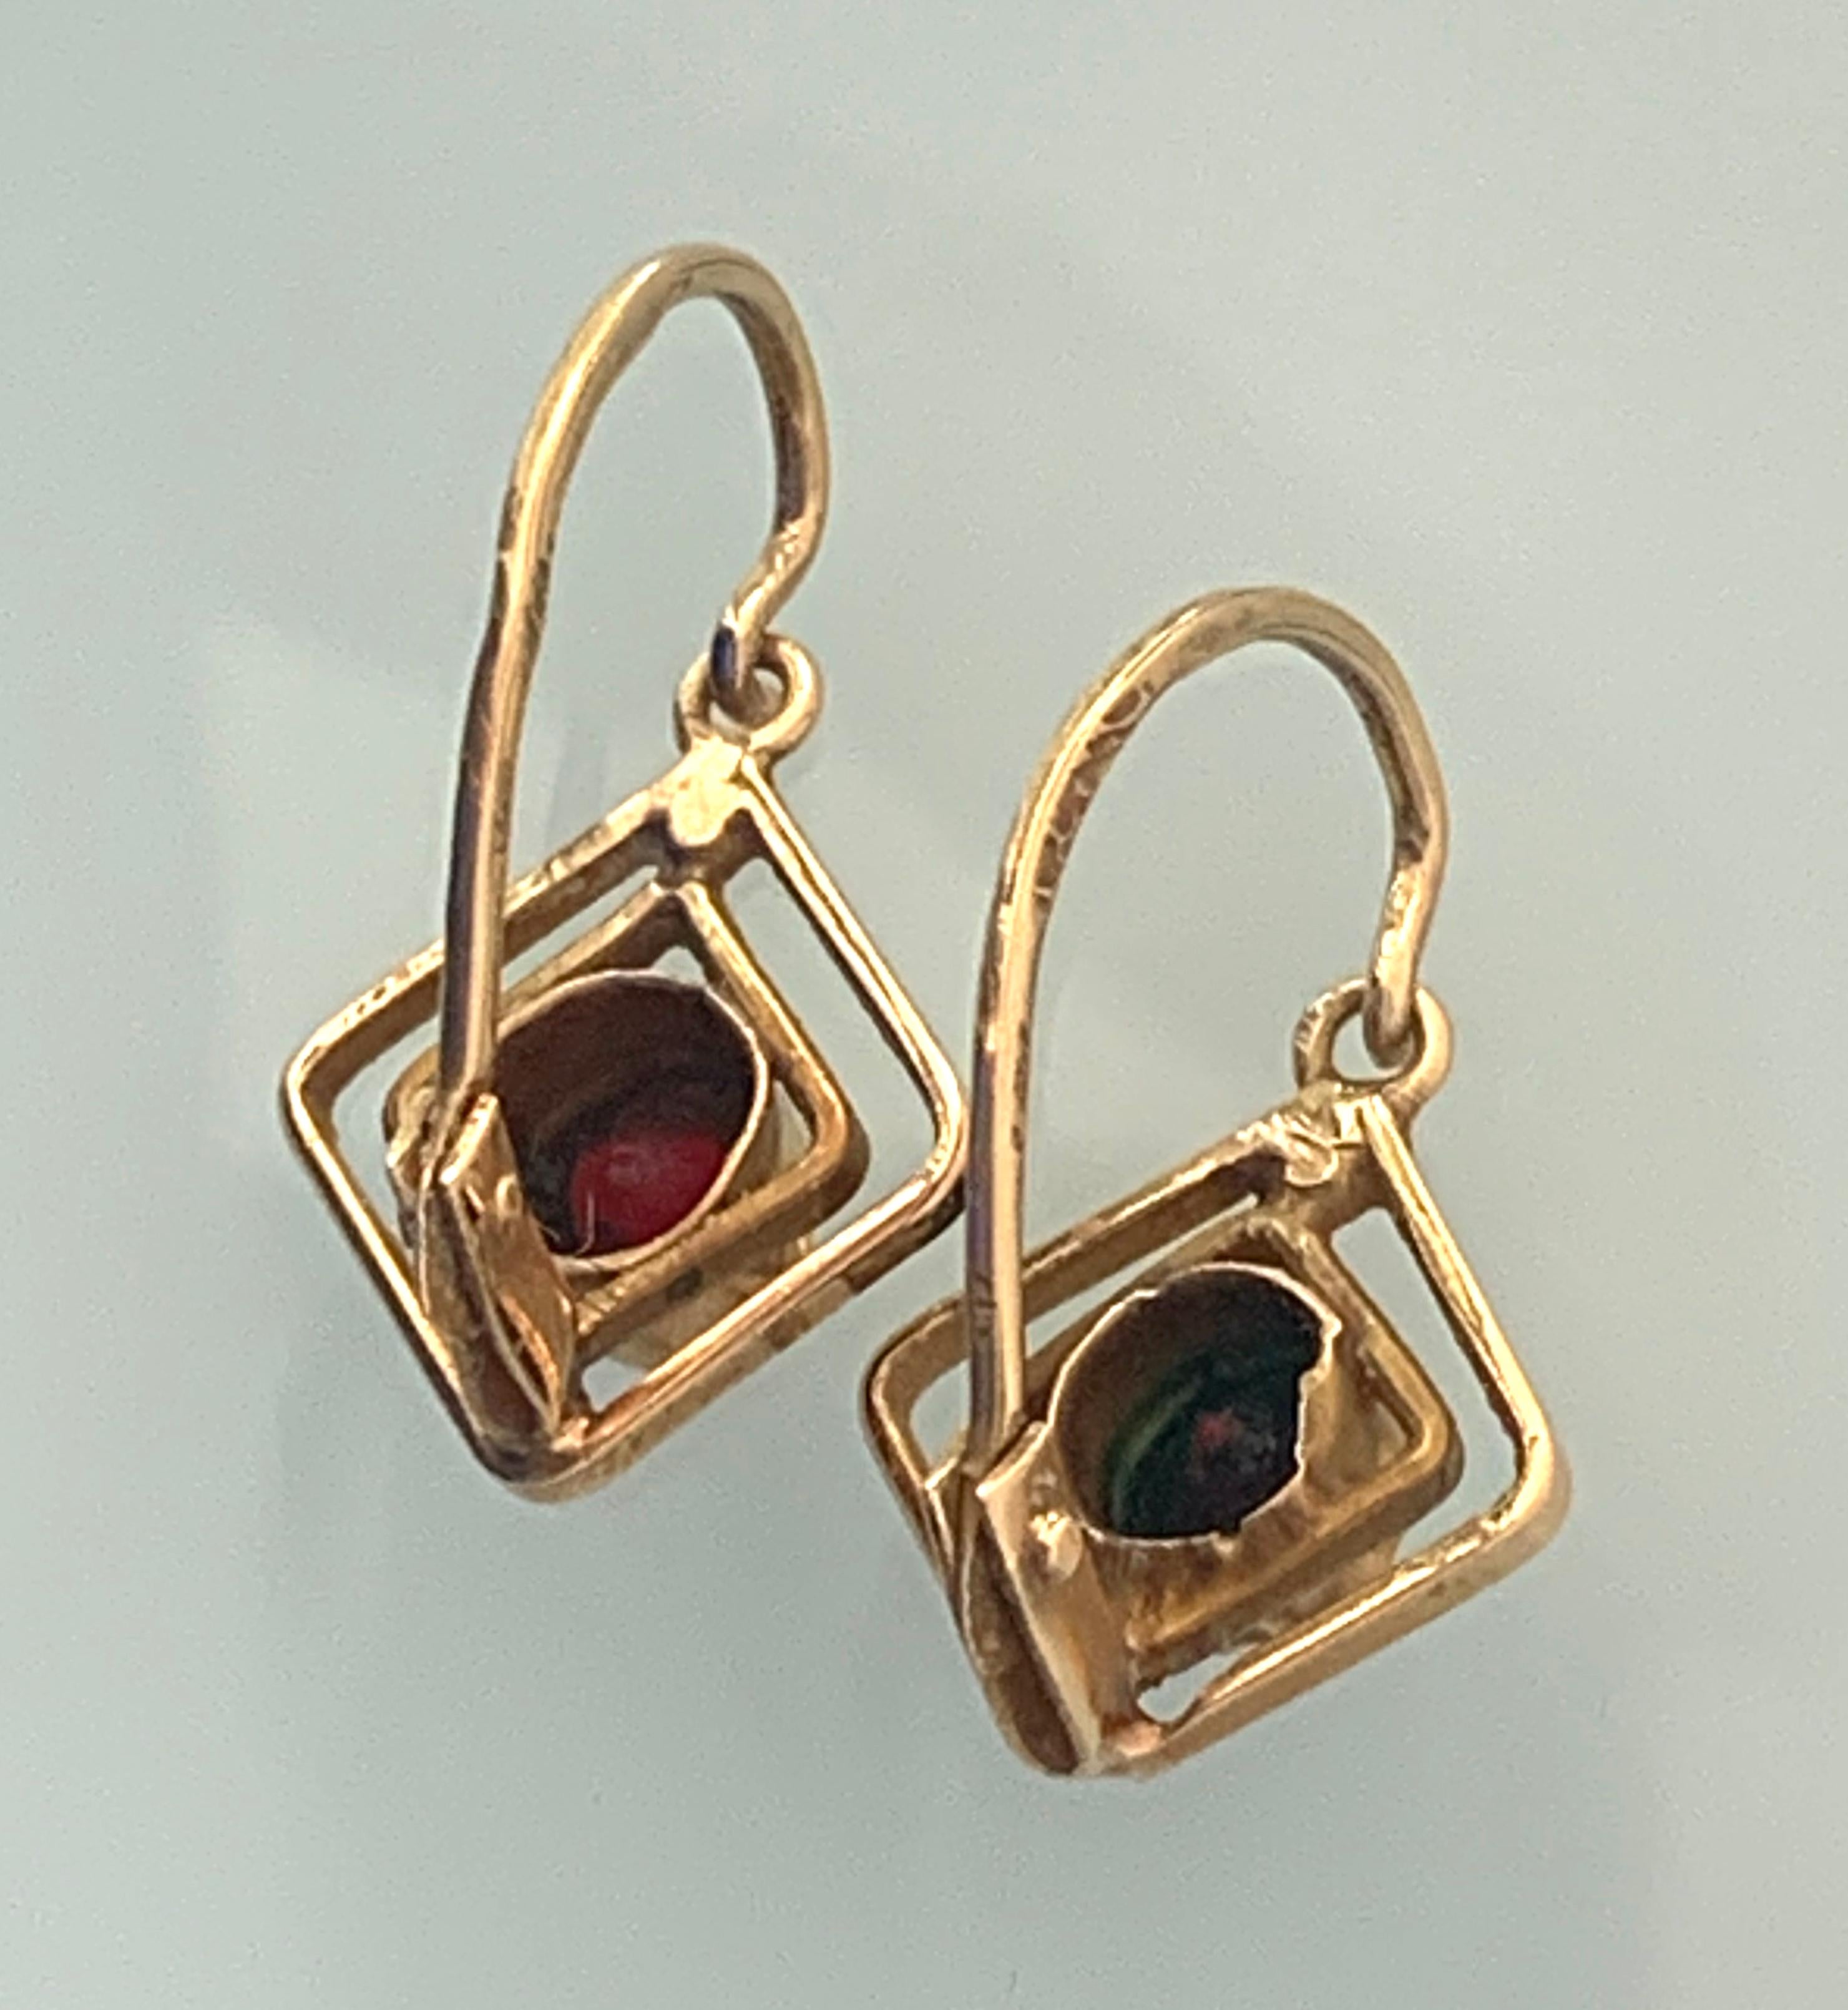 Late Victorian Antique 18ct Gold European Earrings